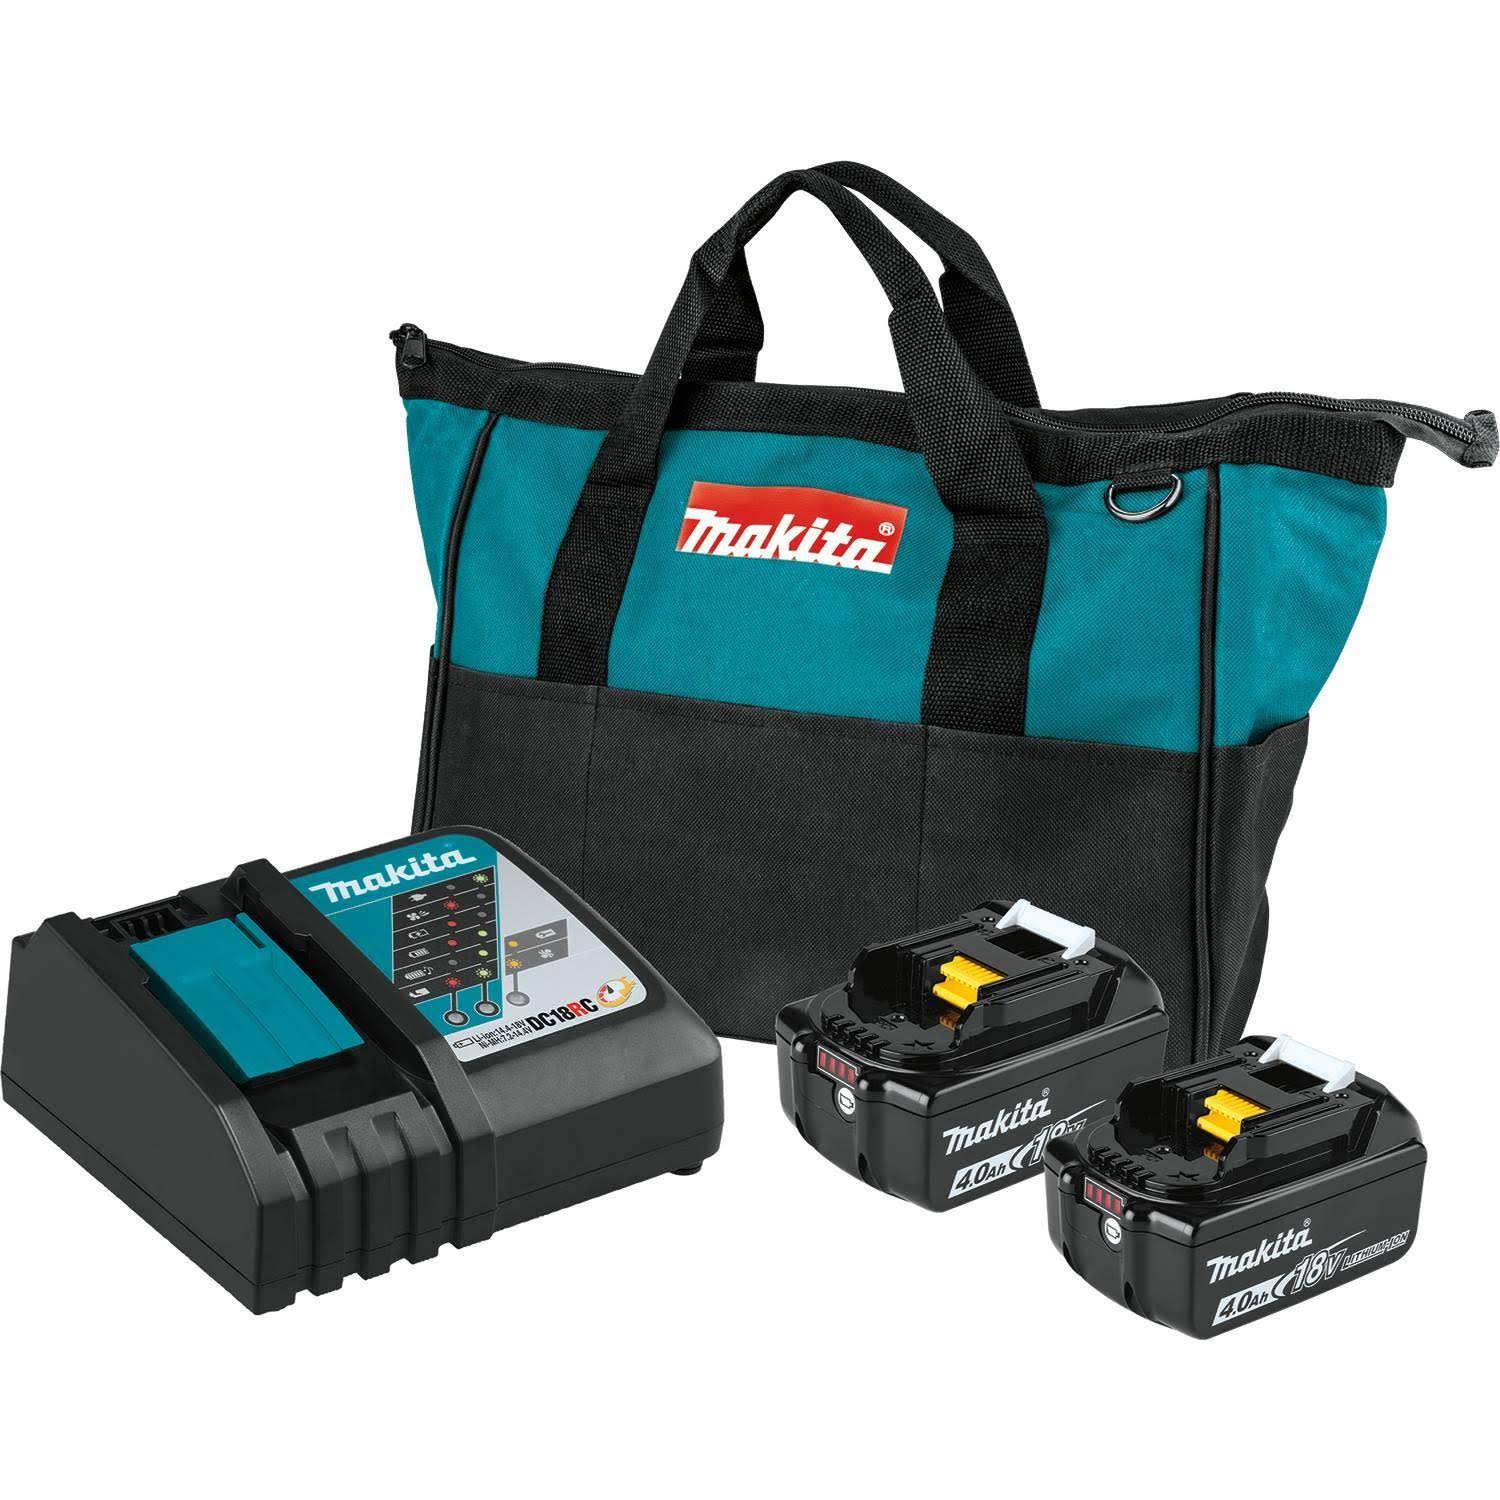 Makita 18V LXT Lithium-Ion Battery and Rapid Optimum Charger Starter Pack, BL1840BDC2